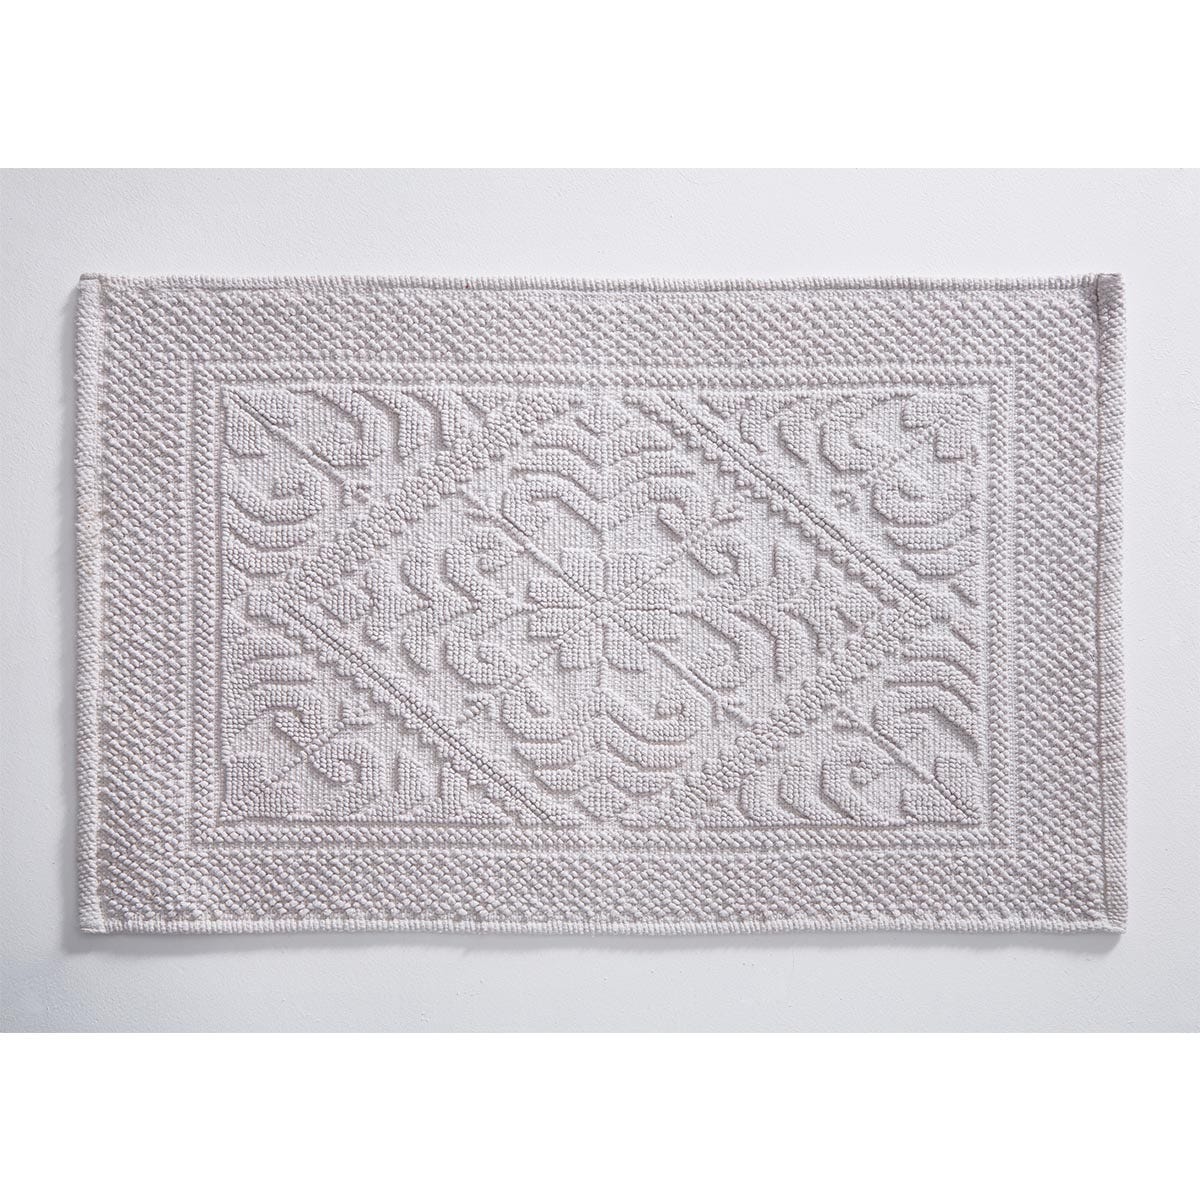 Allure Country House Bath Mat - Grey